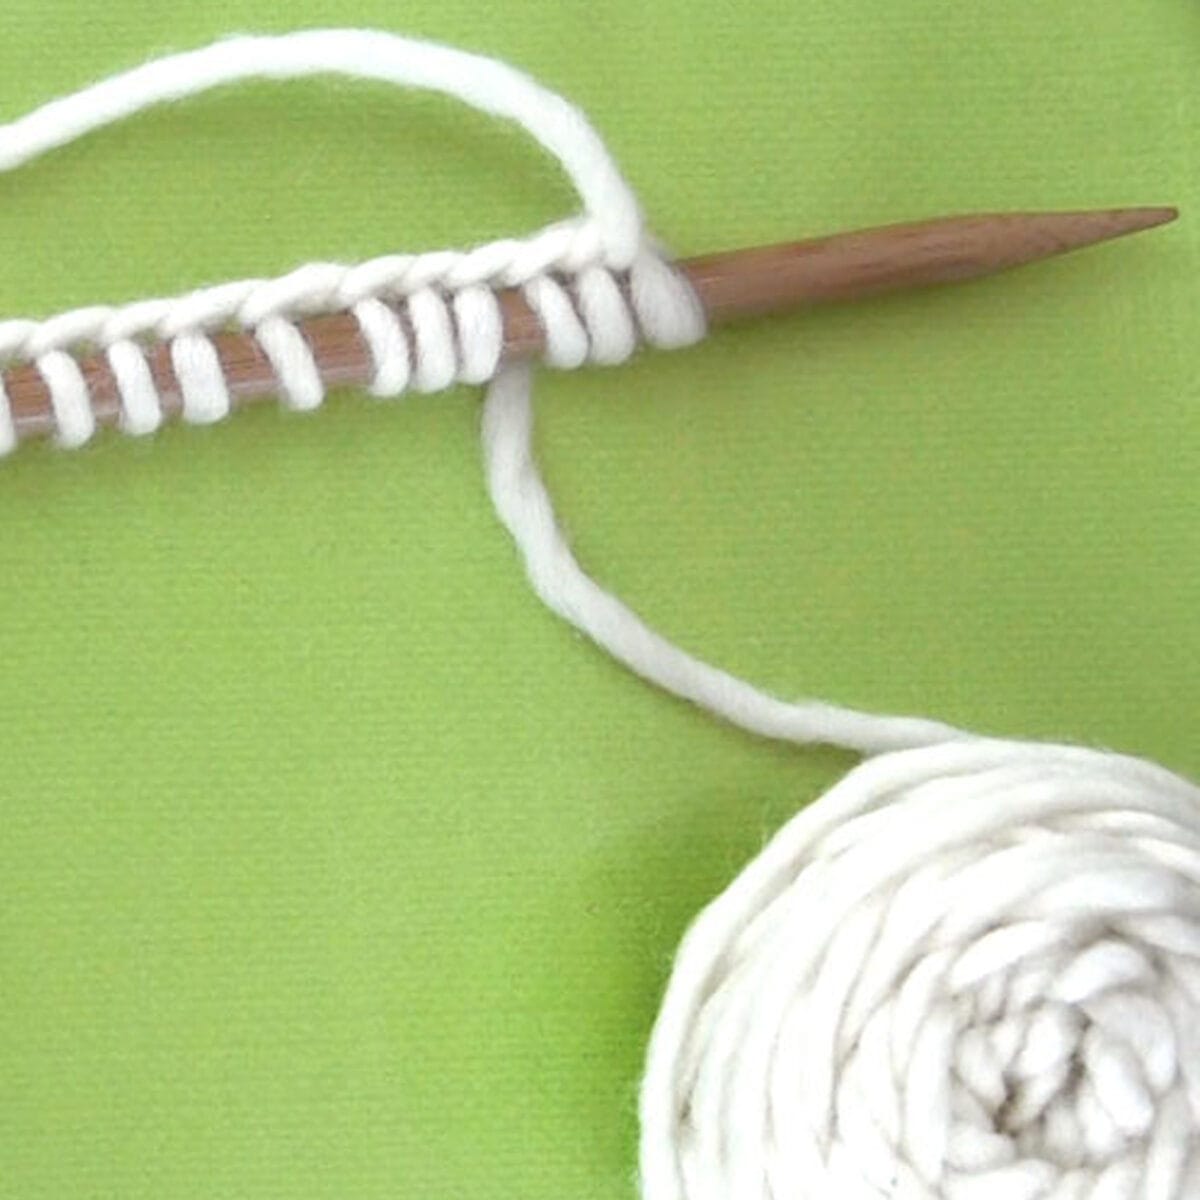 Knitting Stitches Cast On Knitting Needle with white color yarn.